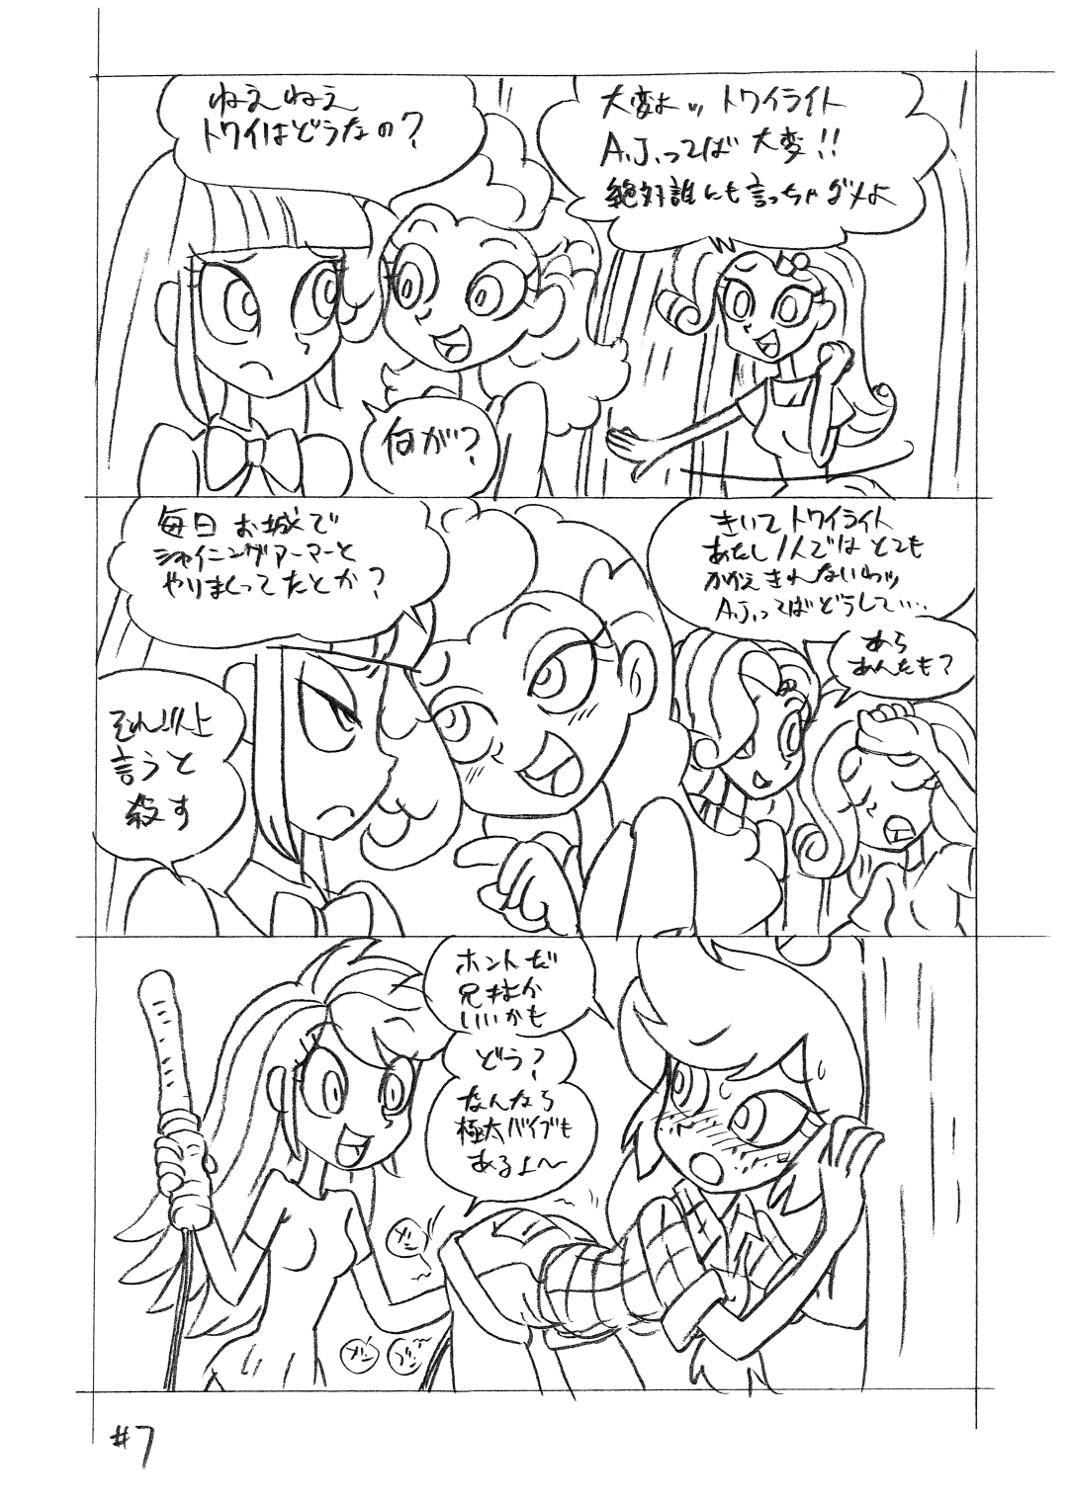 Climax Psychosomatic Counterfeit EX- A.J. in E.G. Style - My little pony friendship is magic Guyonshemale - Page 6